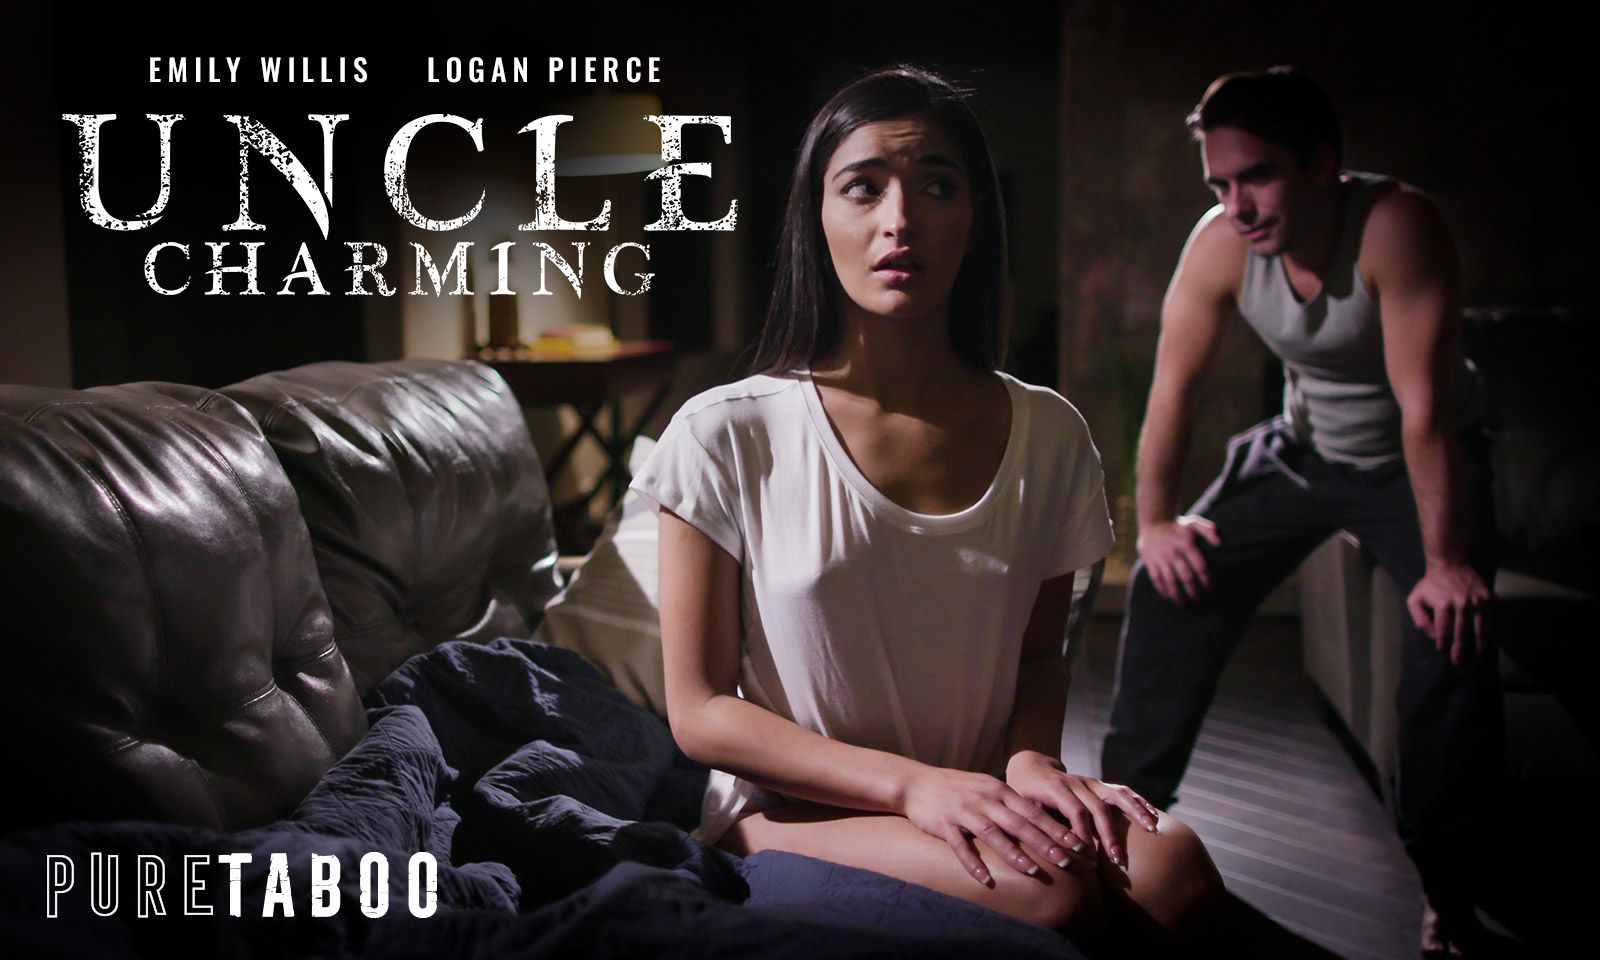 'Uncle Charming' Woos Emily Willis in New Pure Taboo Scene